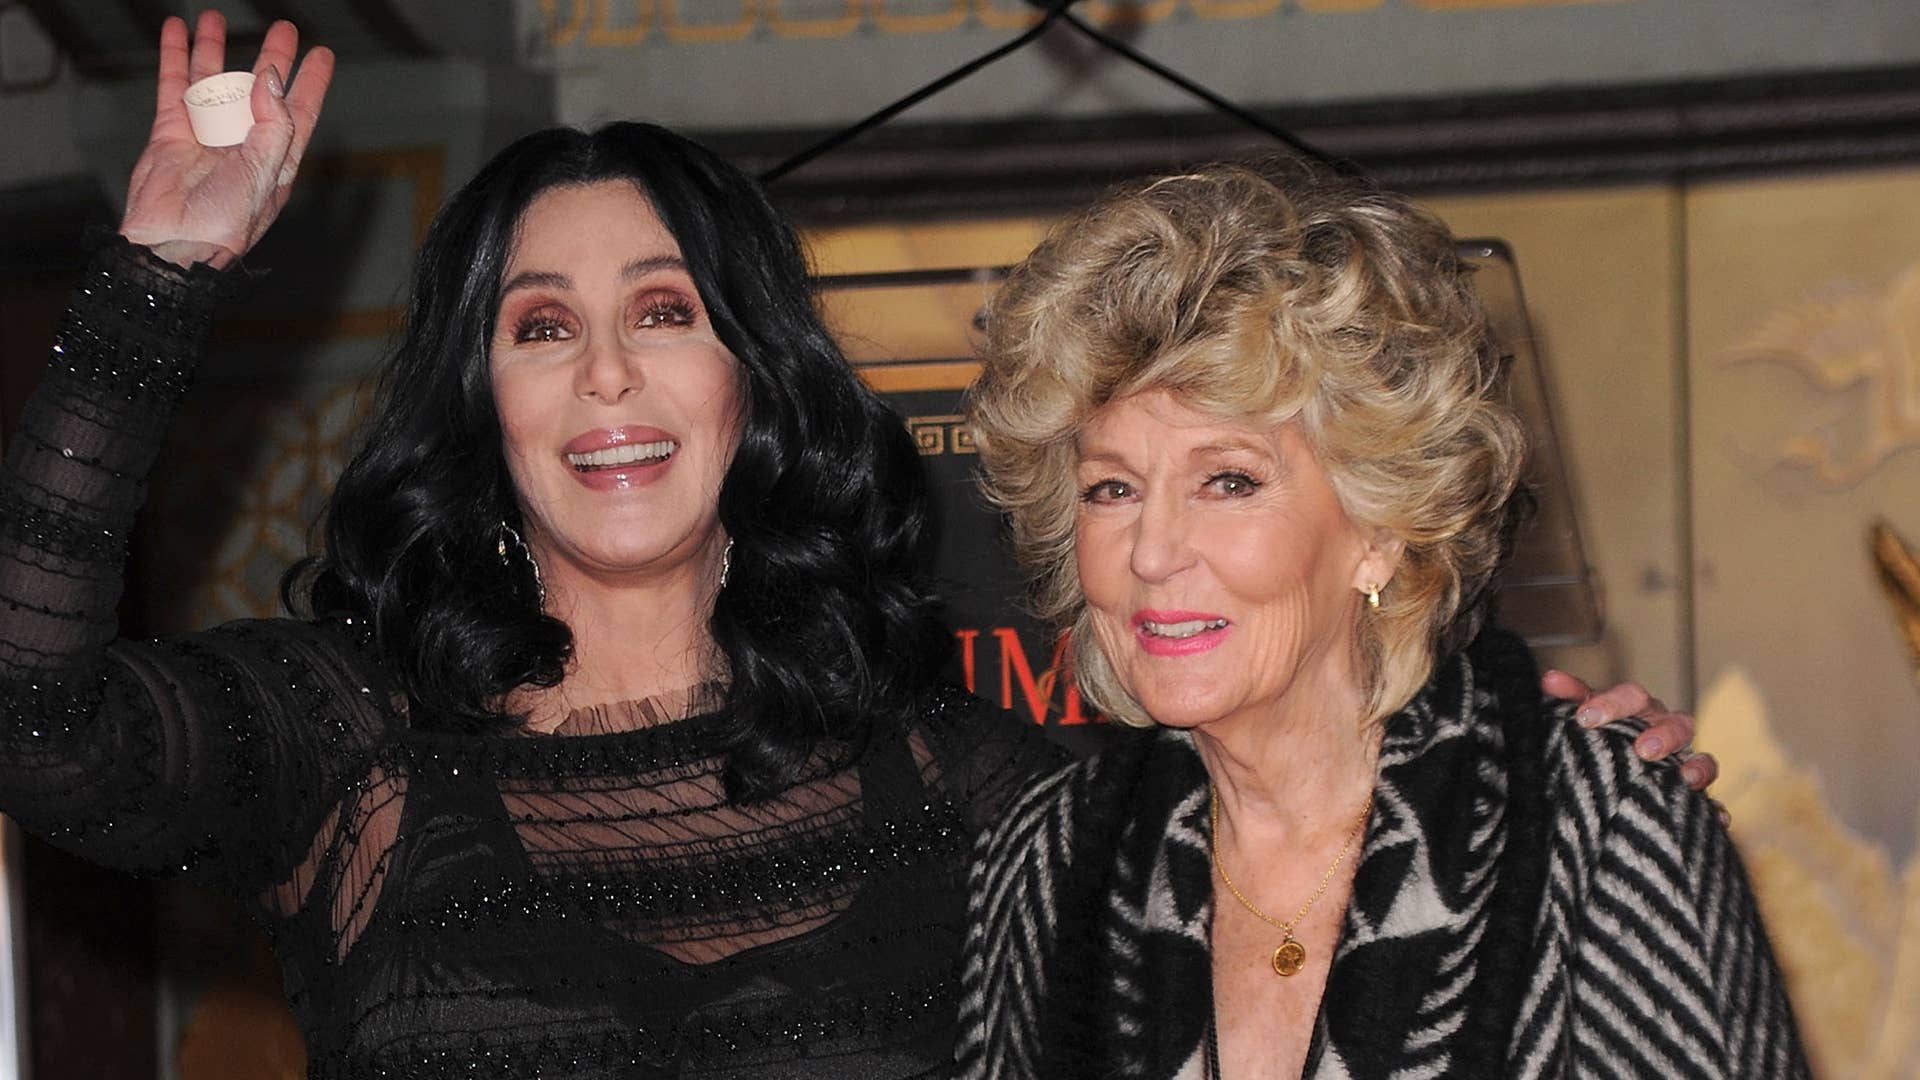 Cher and her mother Georgia Halt during a ceremony at Grauman's Chinese Theatre